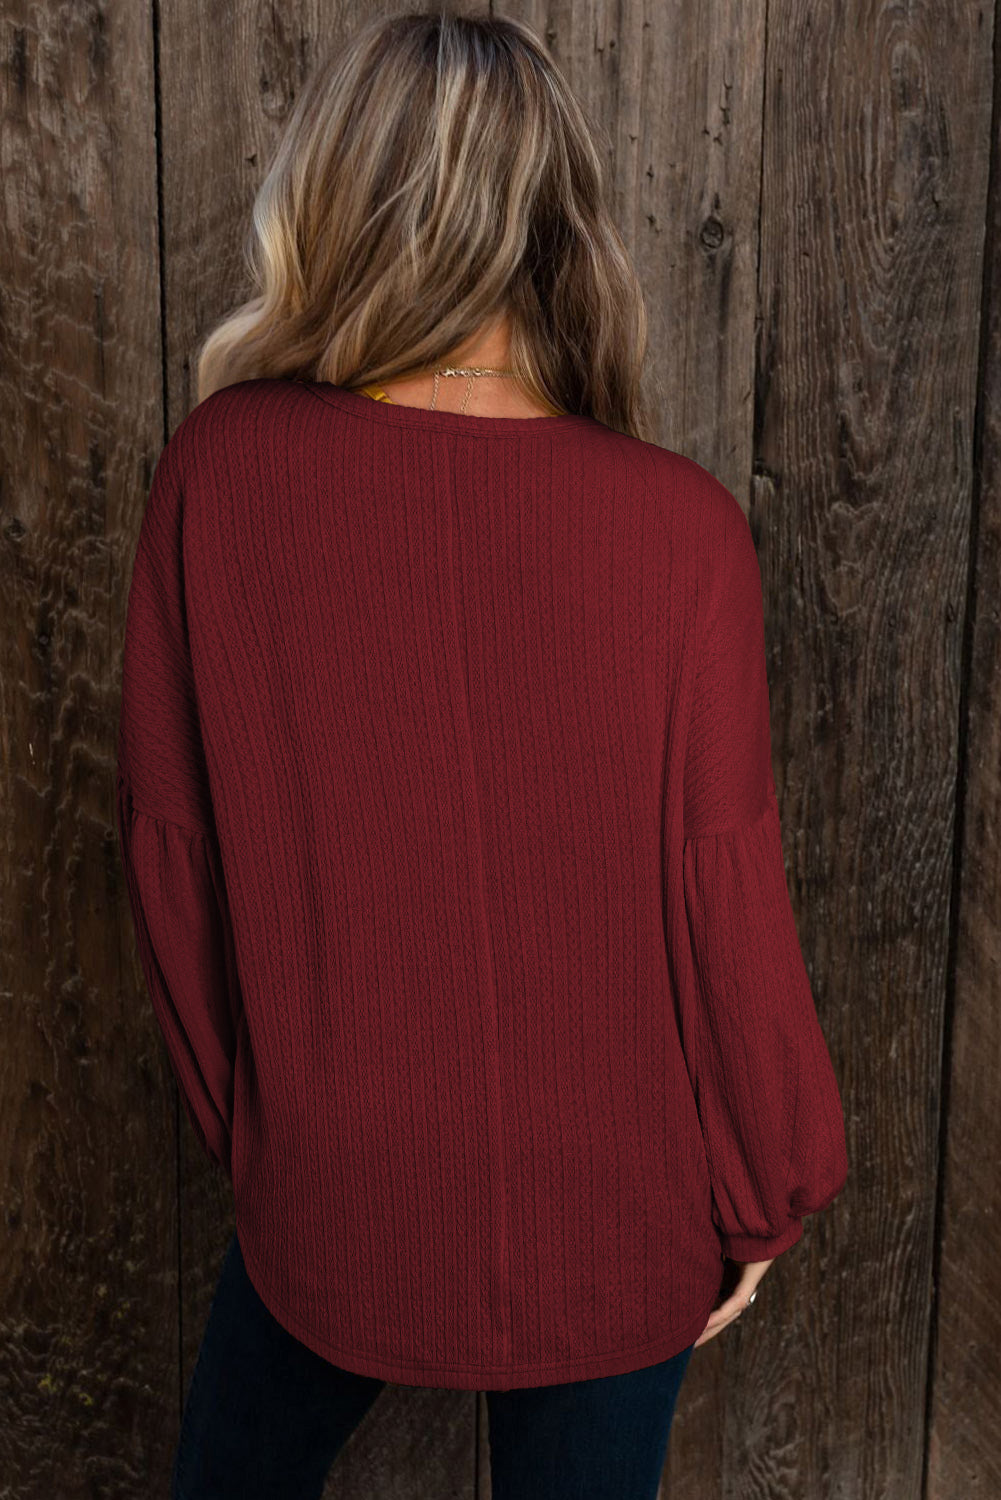 Brown Solid Color Textured Pullover Casual Top